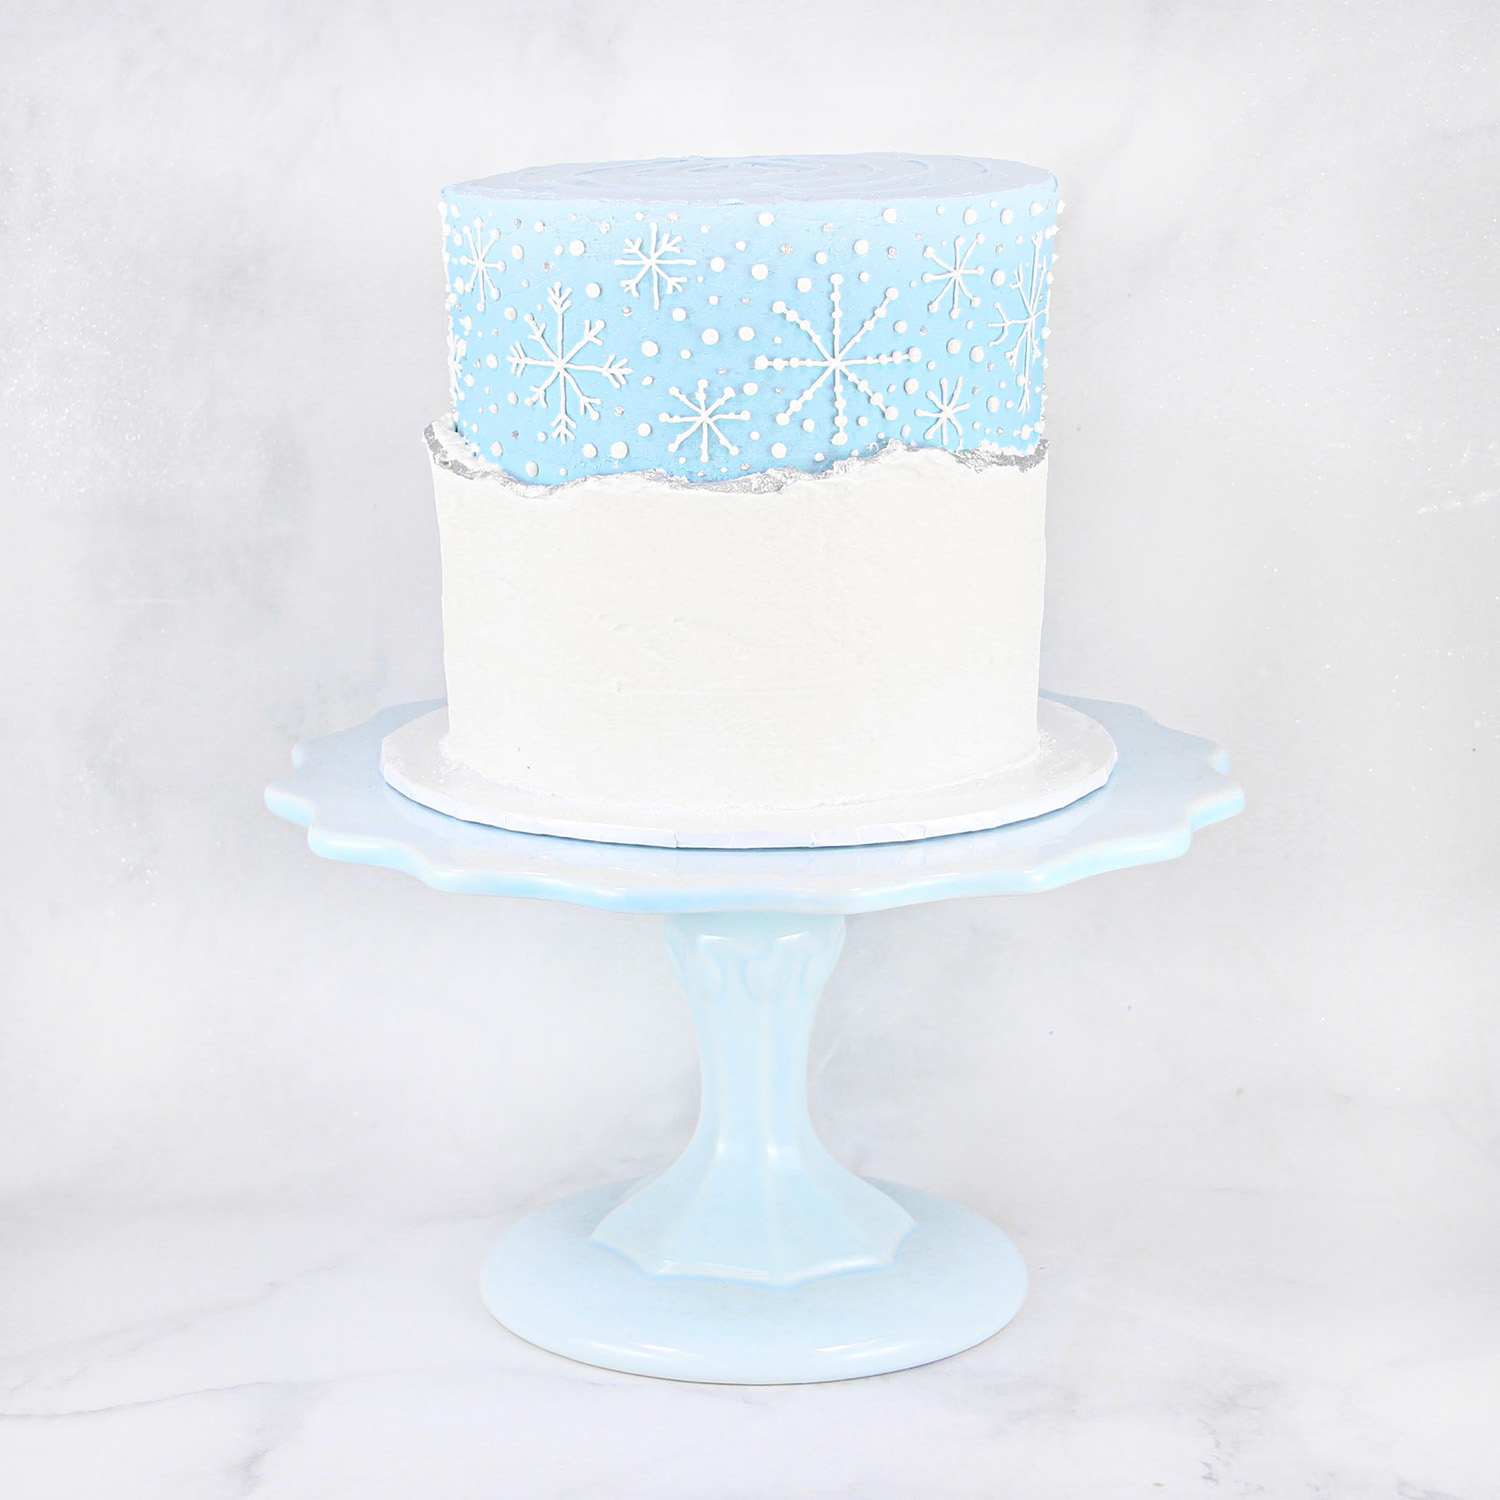 2 layer cake covered in blue buttercream with faultline snow live edge painted in silver luster dust and hand piped snowflakes.